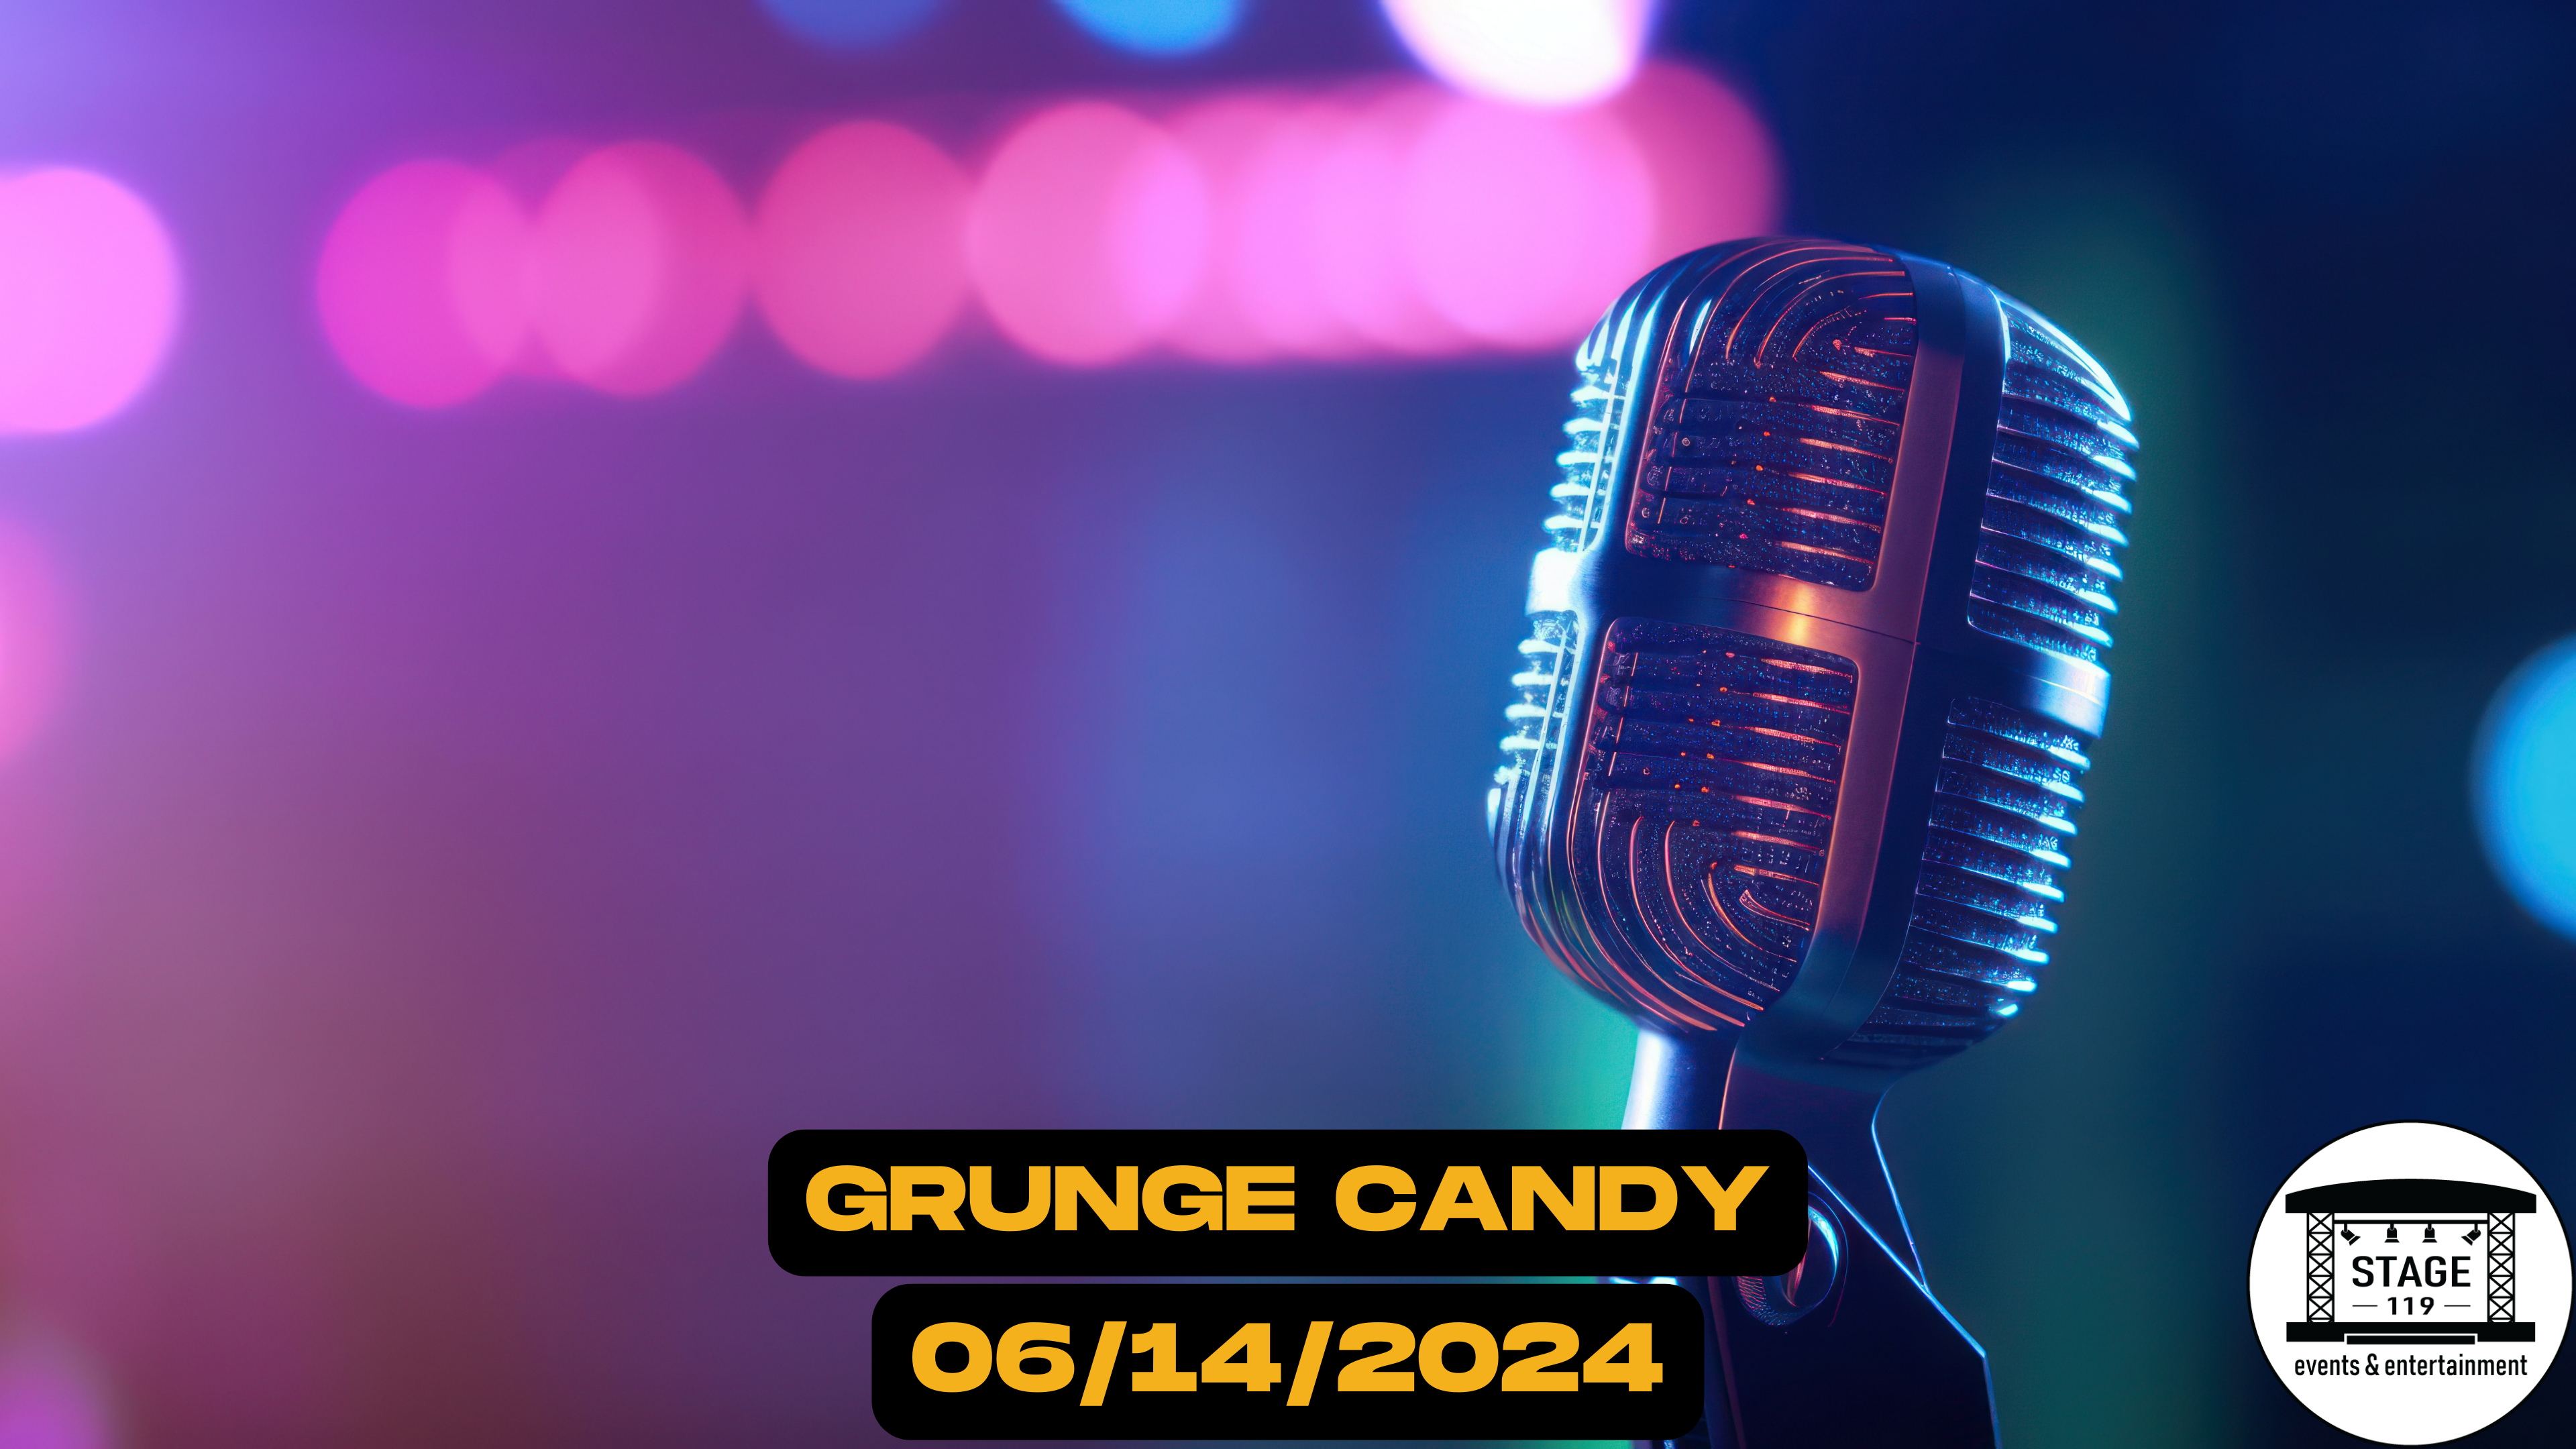 GRUNGE CANDY at stage 119